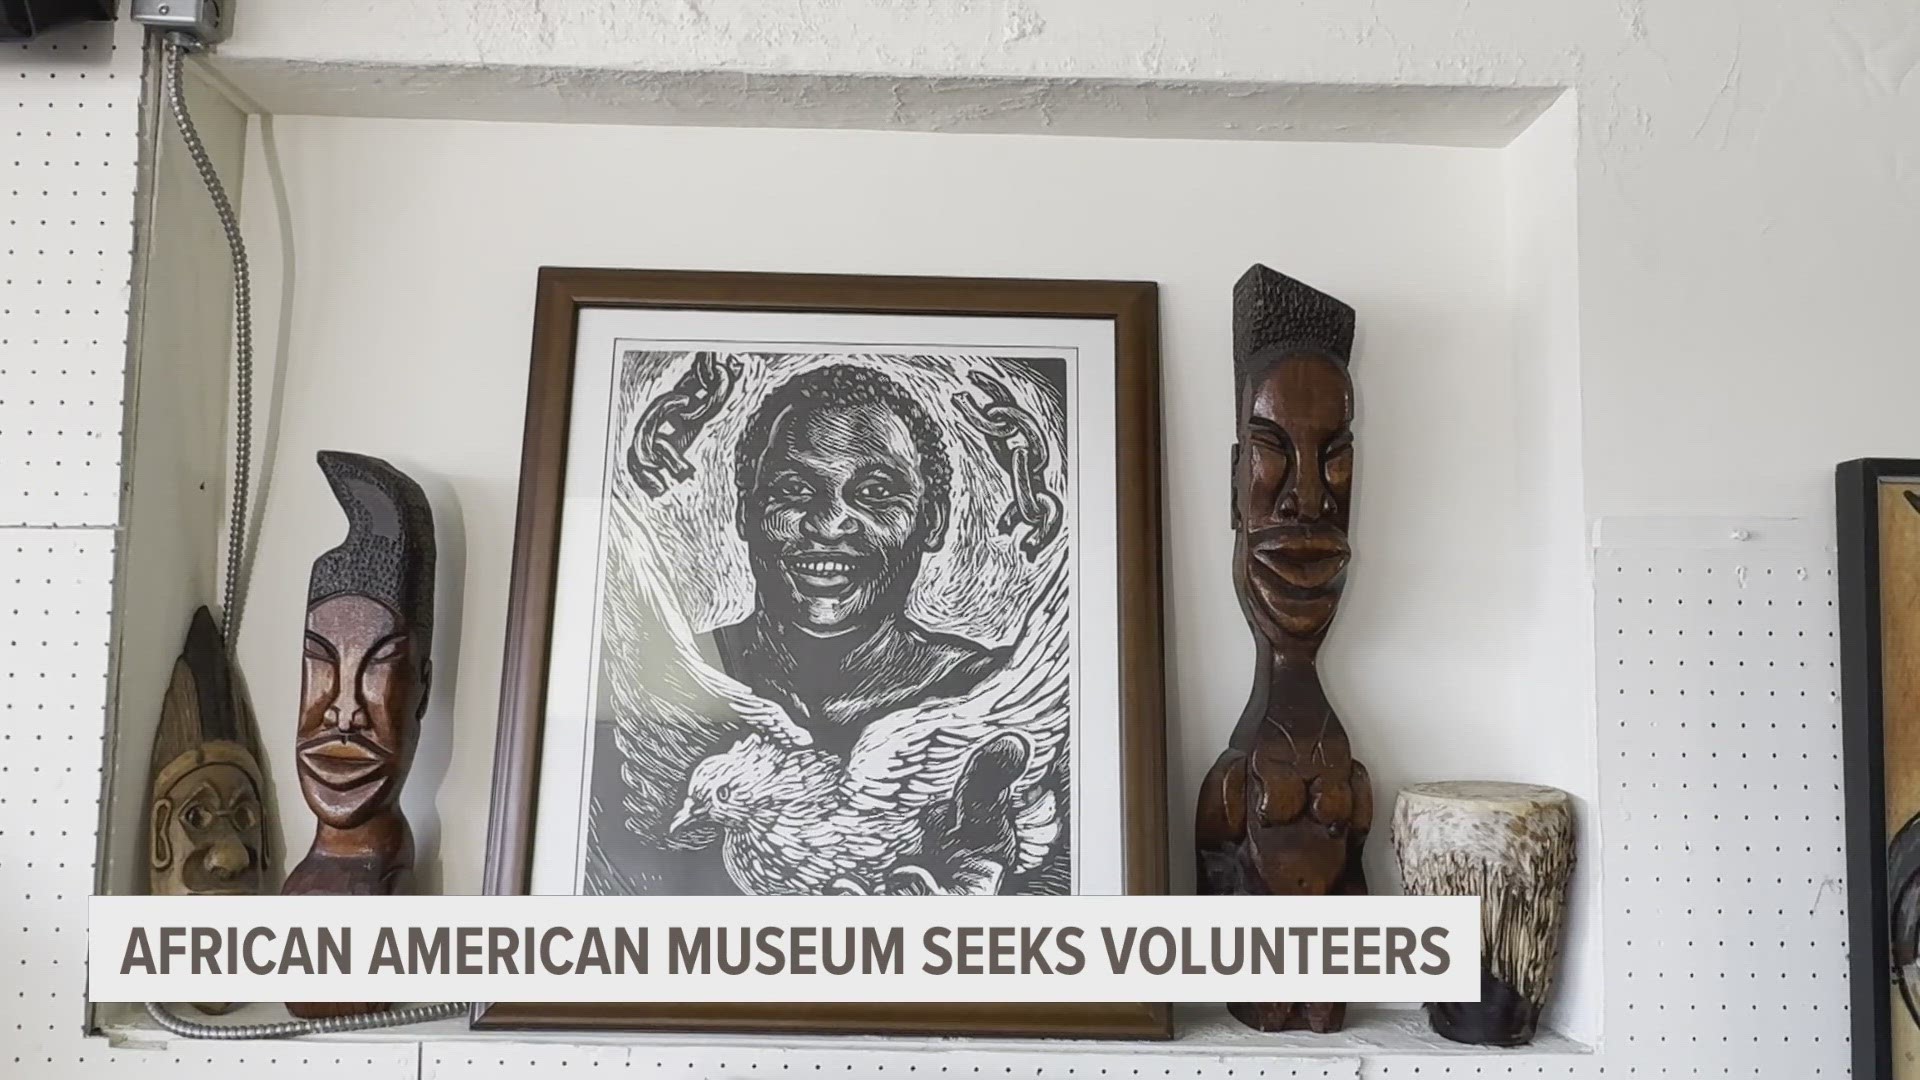 The James Jackson Museum of African American History hopes the exhibits inspire the next generation of African Americans in our community.